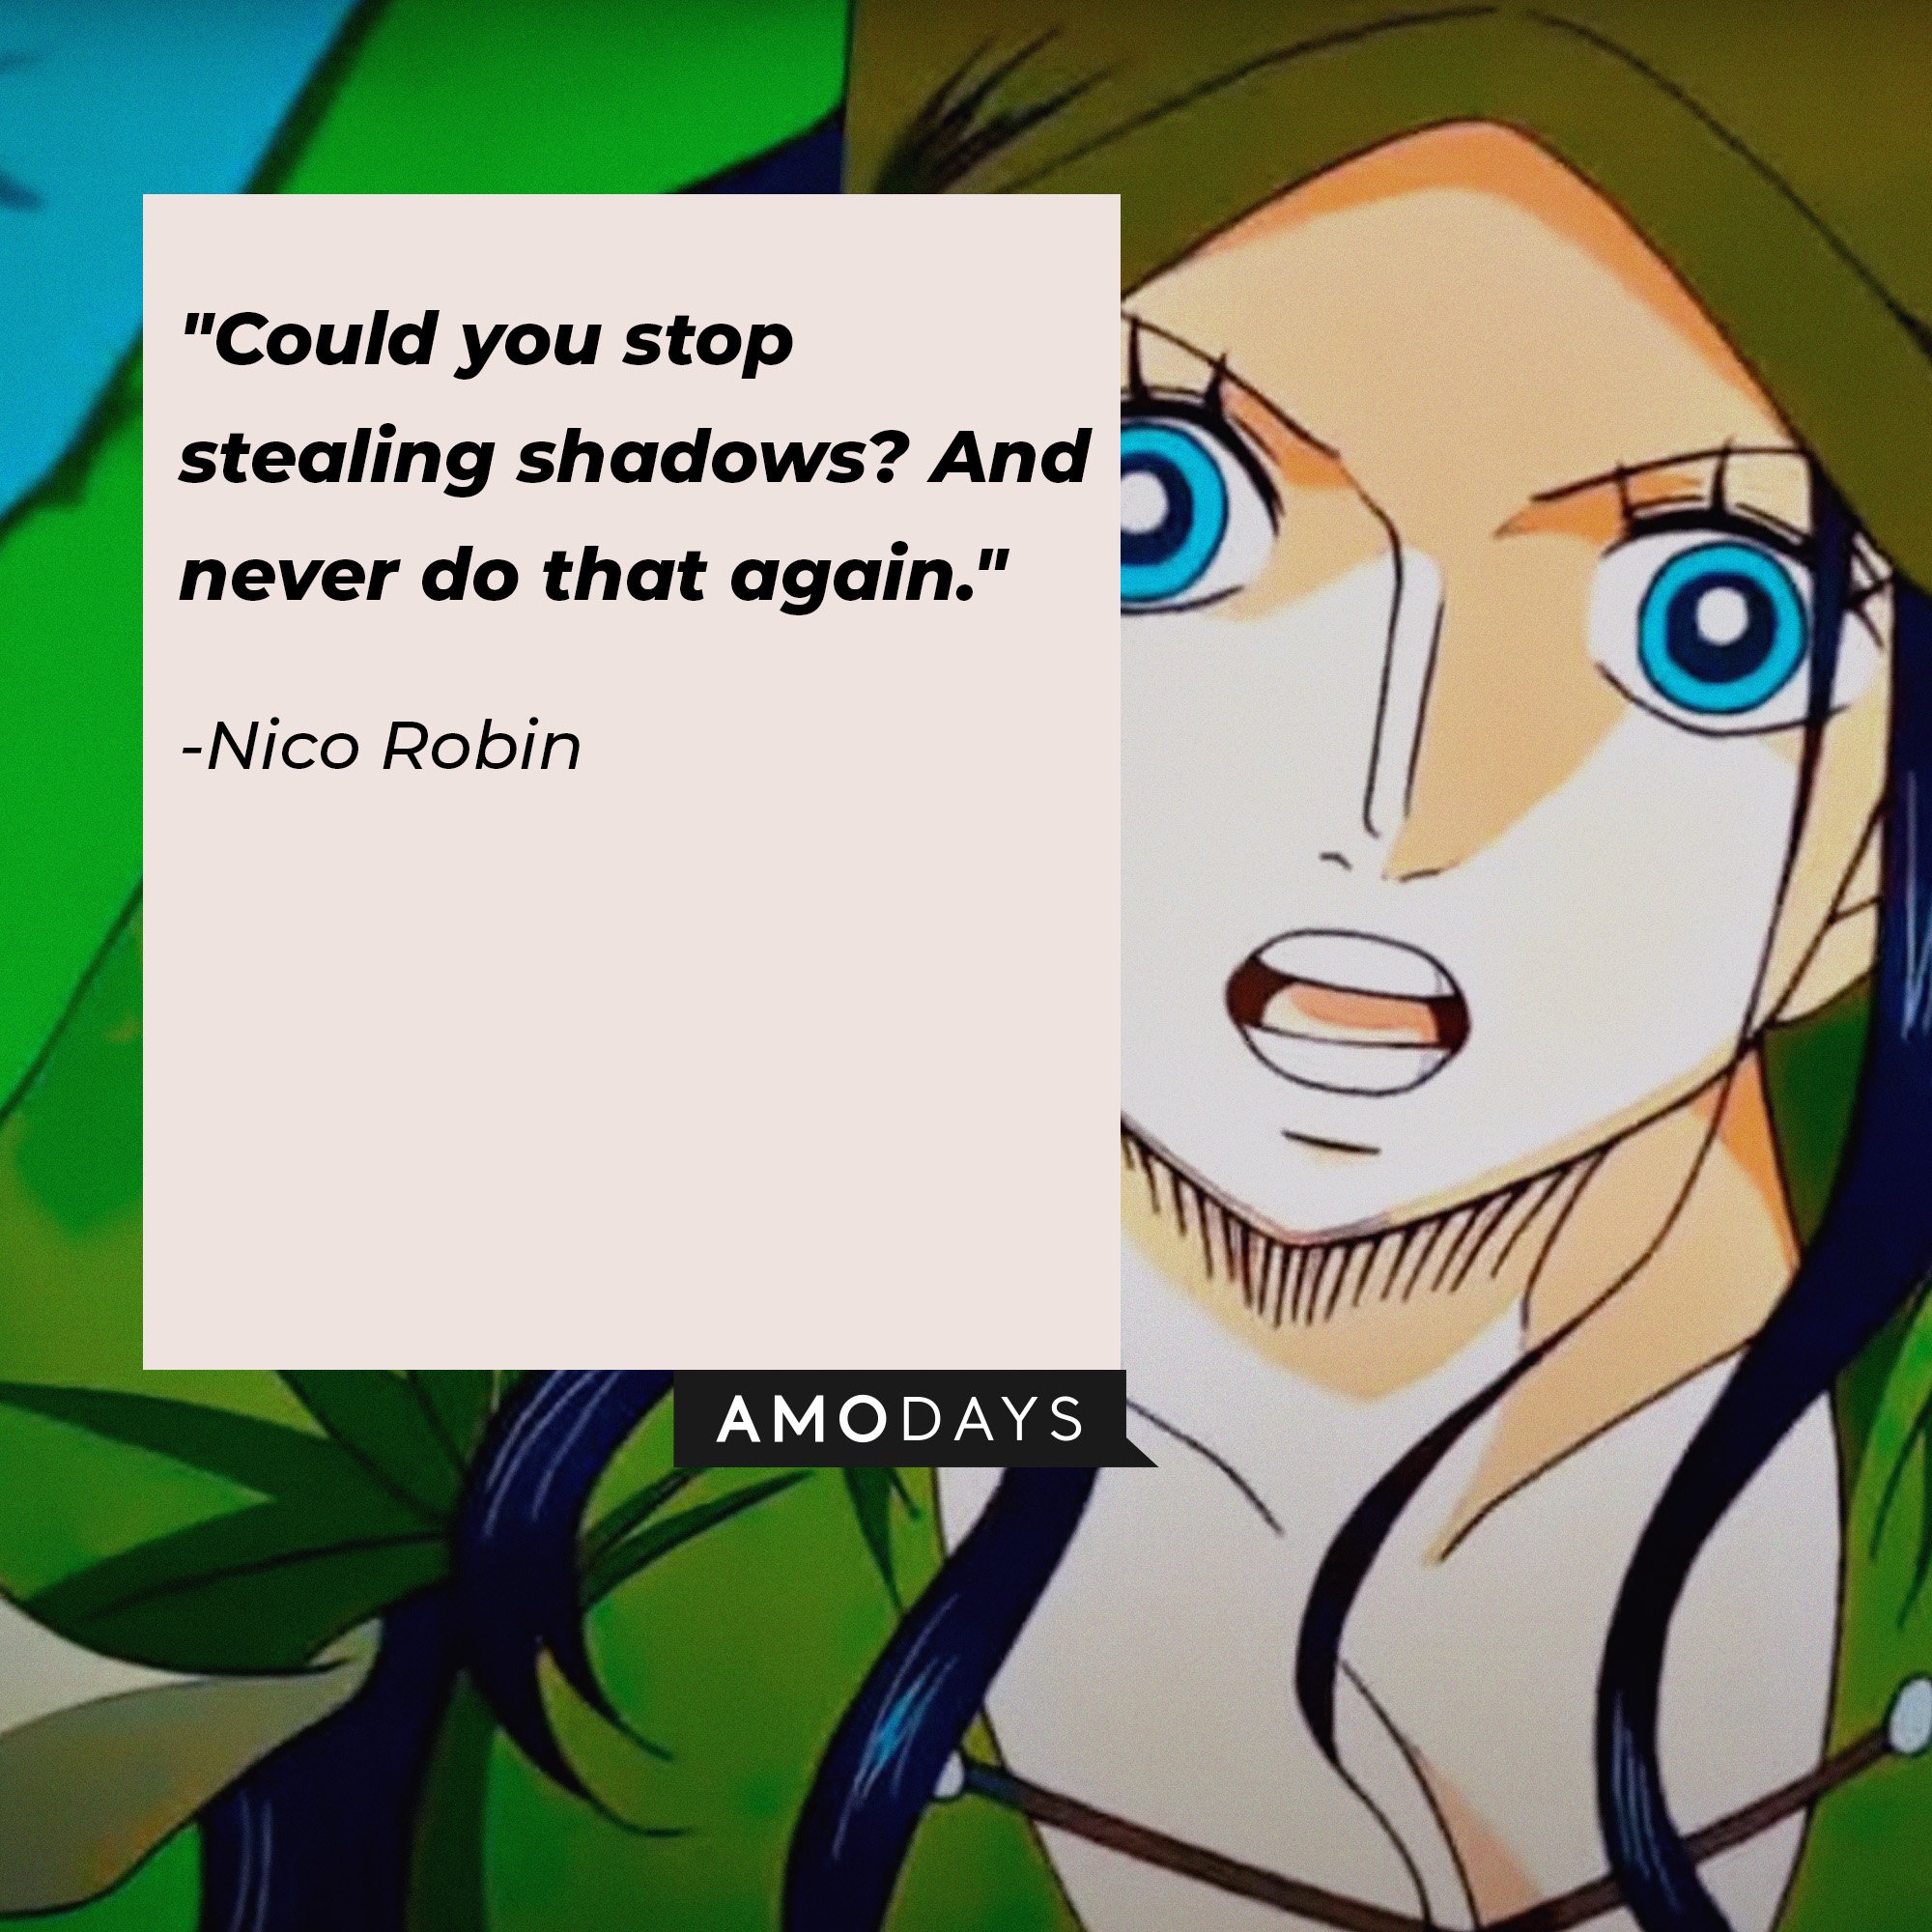 Nico Robin’s quote: "Could you stop stealing shadows? And never do that again." | Image: AmoDays